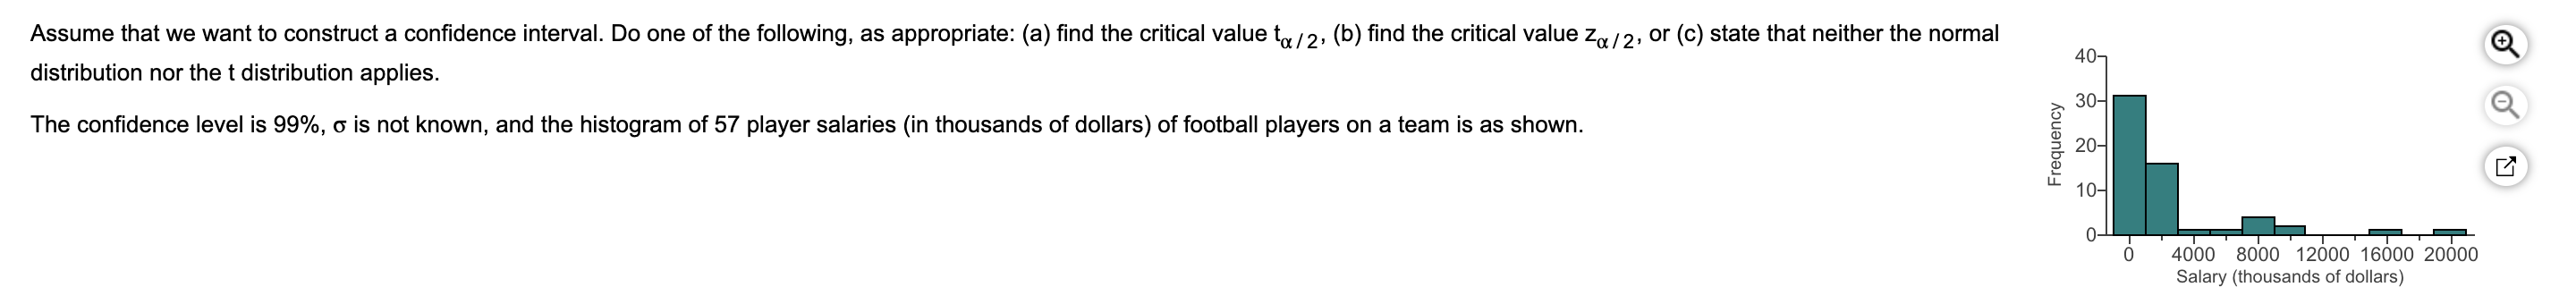 Assume that we want to construct a confidence interval. Do one of the following, as appropriate: (a) find the critical value to/2, (b) find the critical value z/2, or (c) state that neither the normal
40-
distribution nor the t distribution applies.
30-
The confidence level is 99%, o is not known, and the histogram of 57 player salaries (in thousands of dollars) of football players on a team is as shown.
20-
10-
0
4000 8000 12000 16000 20000
Salary (thousands of dollars)
Frequency
